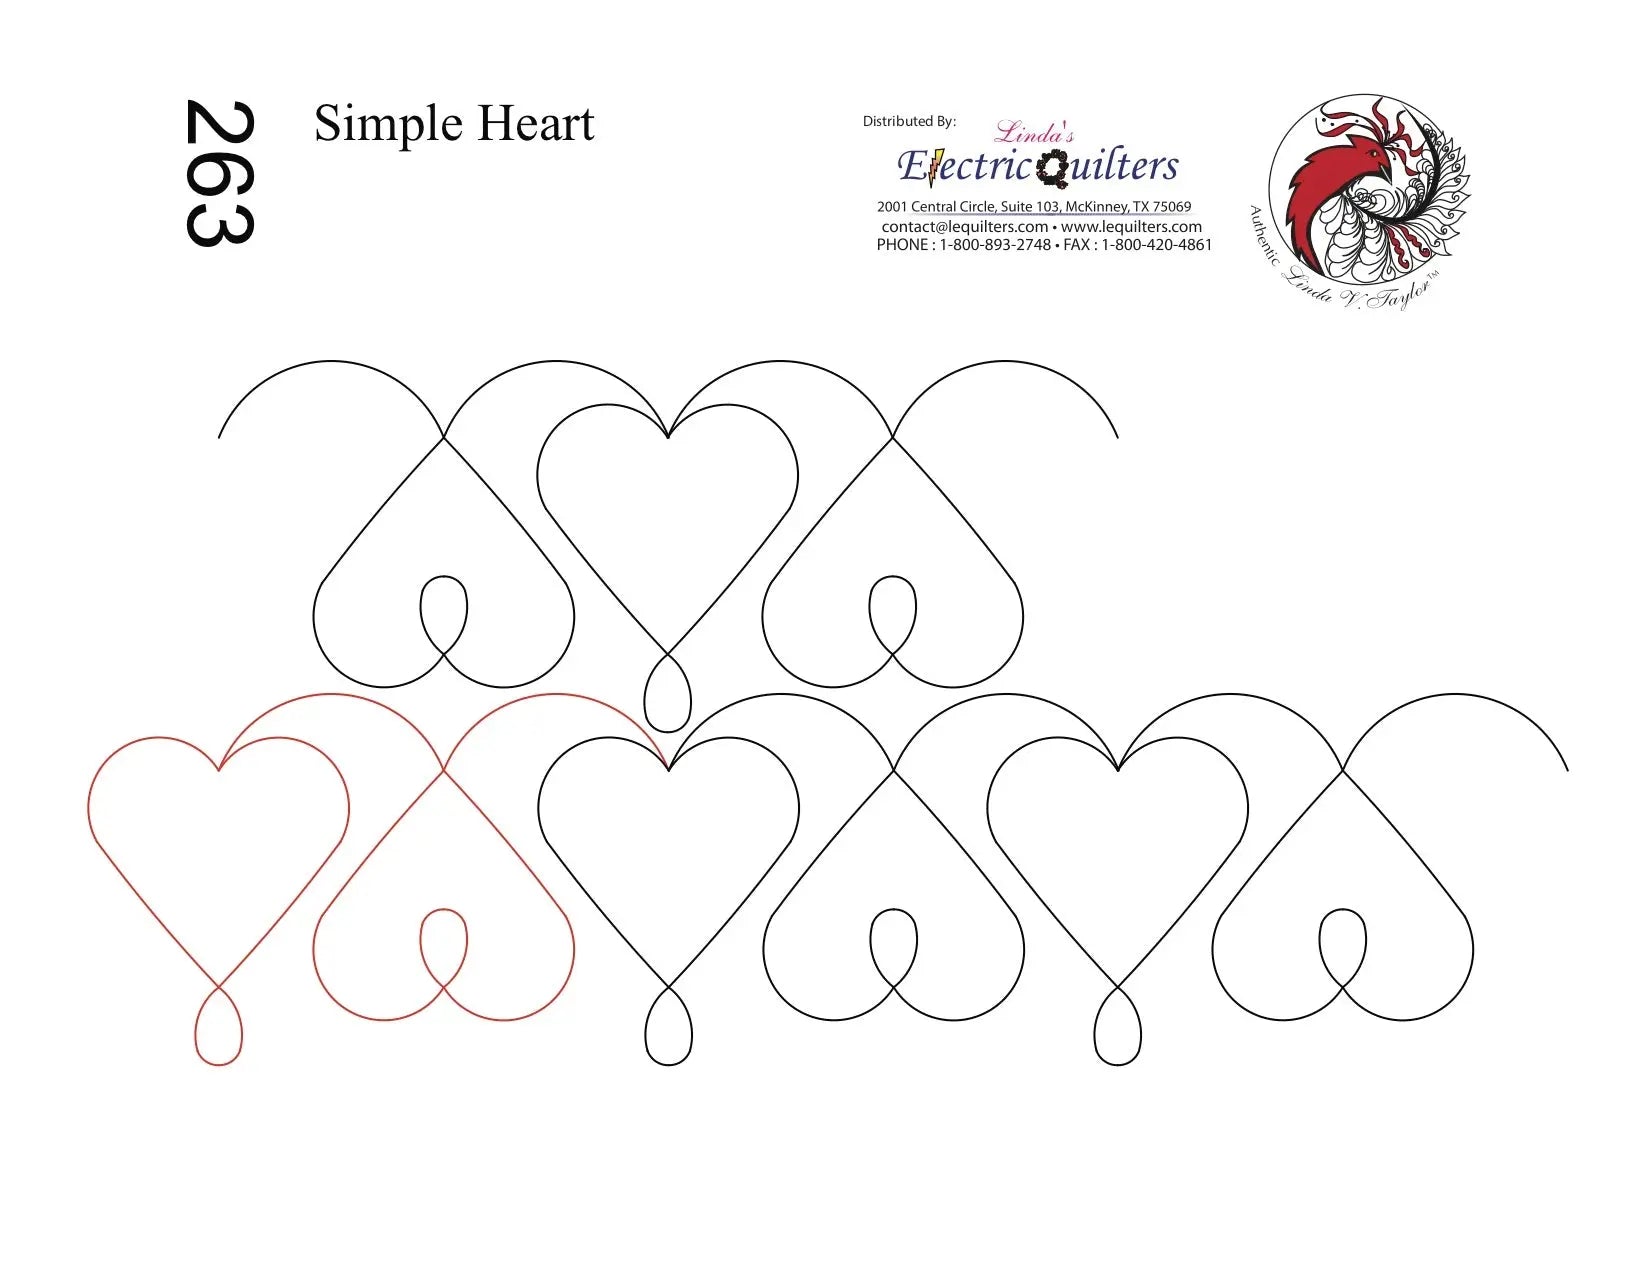 263 Simple Heart Pantograph by Linda V. Taylor - Linda's Electric Quilters